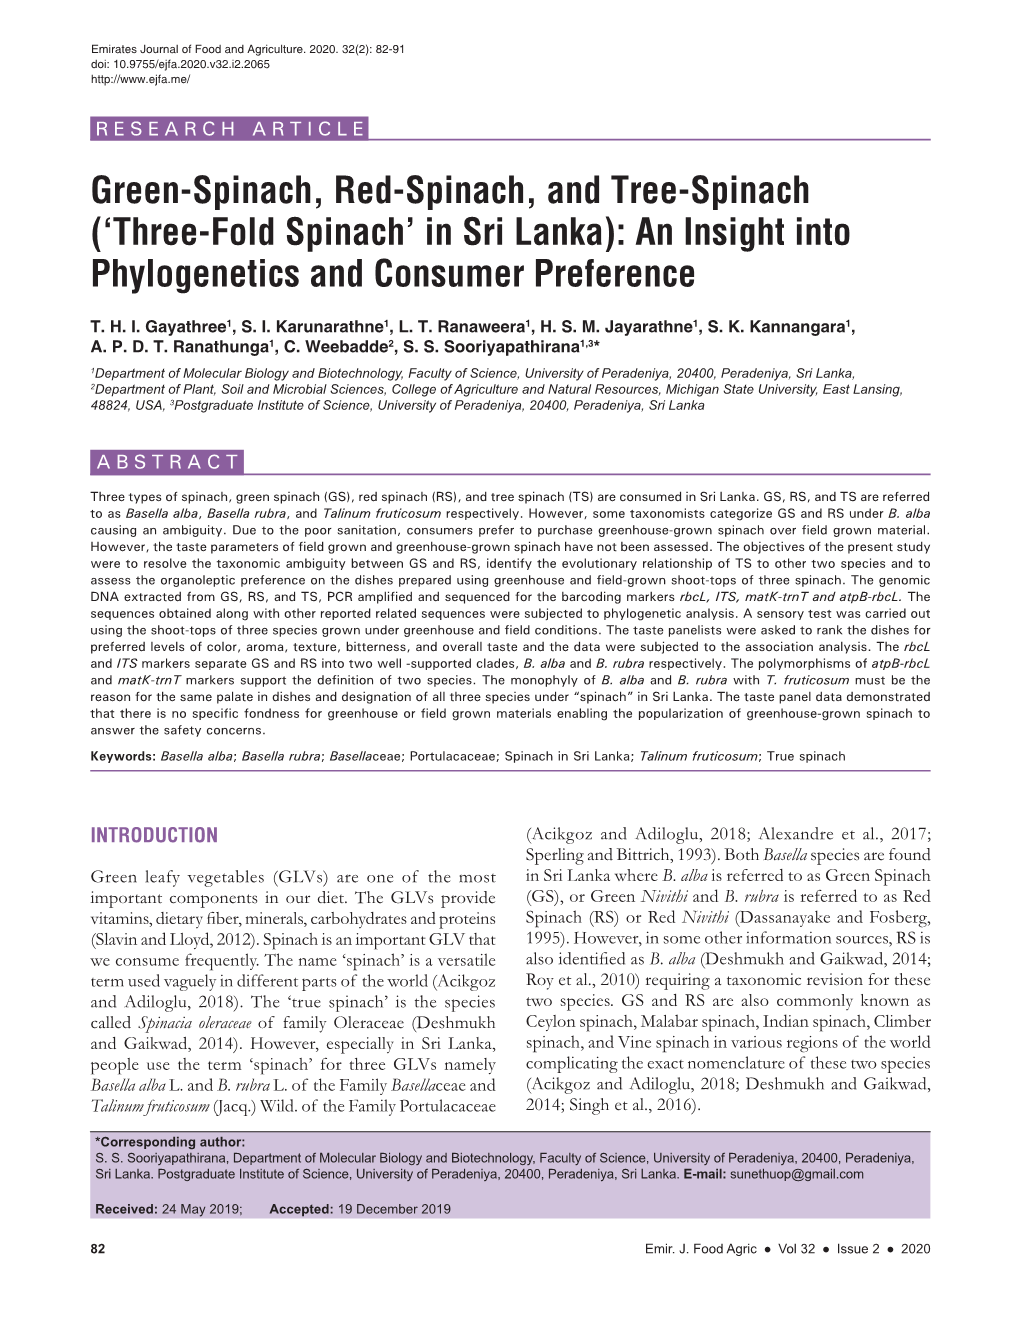 ('Three-Fold Spinach' in Sri Lanka): an Insight Into Phylogenetics And